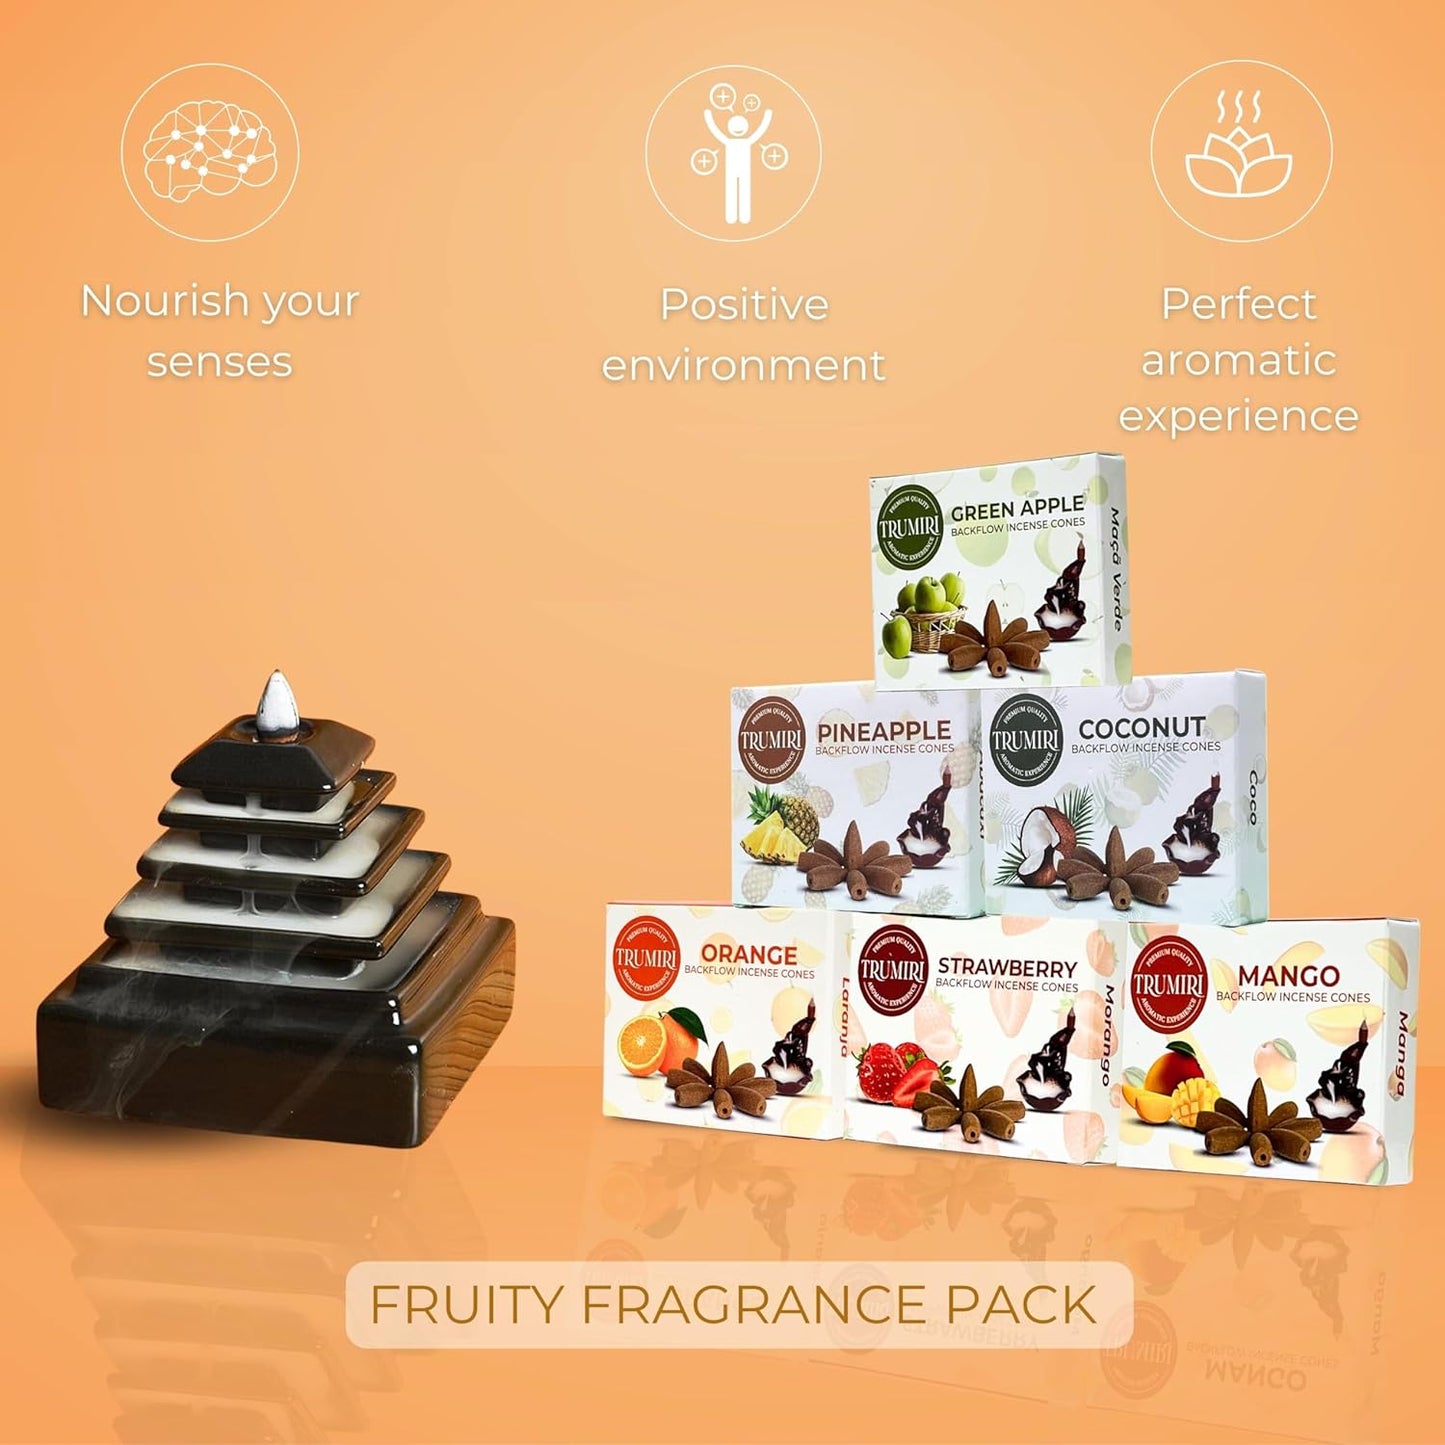 Trumiri Fruity Scents Backflow Incense Cones Variety Pack of 6 Scents with 10 Backflow Cones per Scent - Total 60 Cones